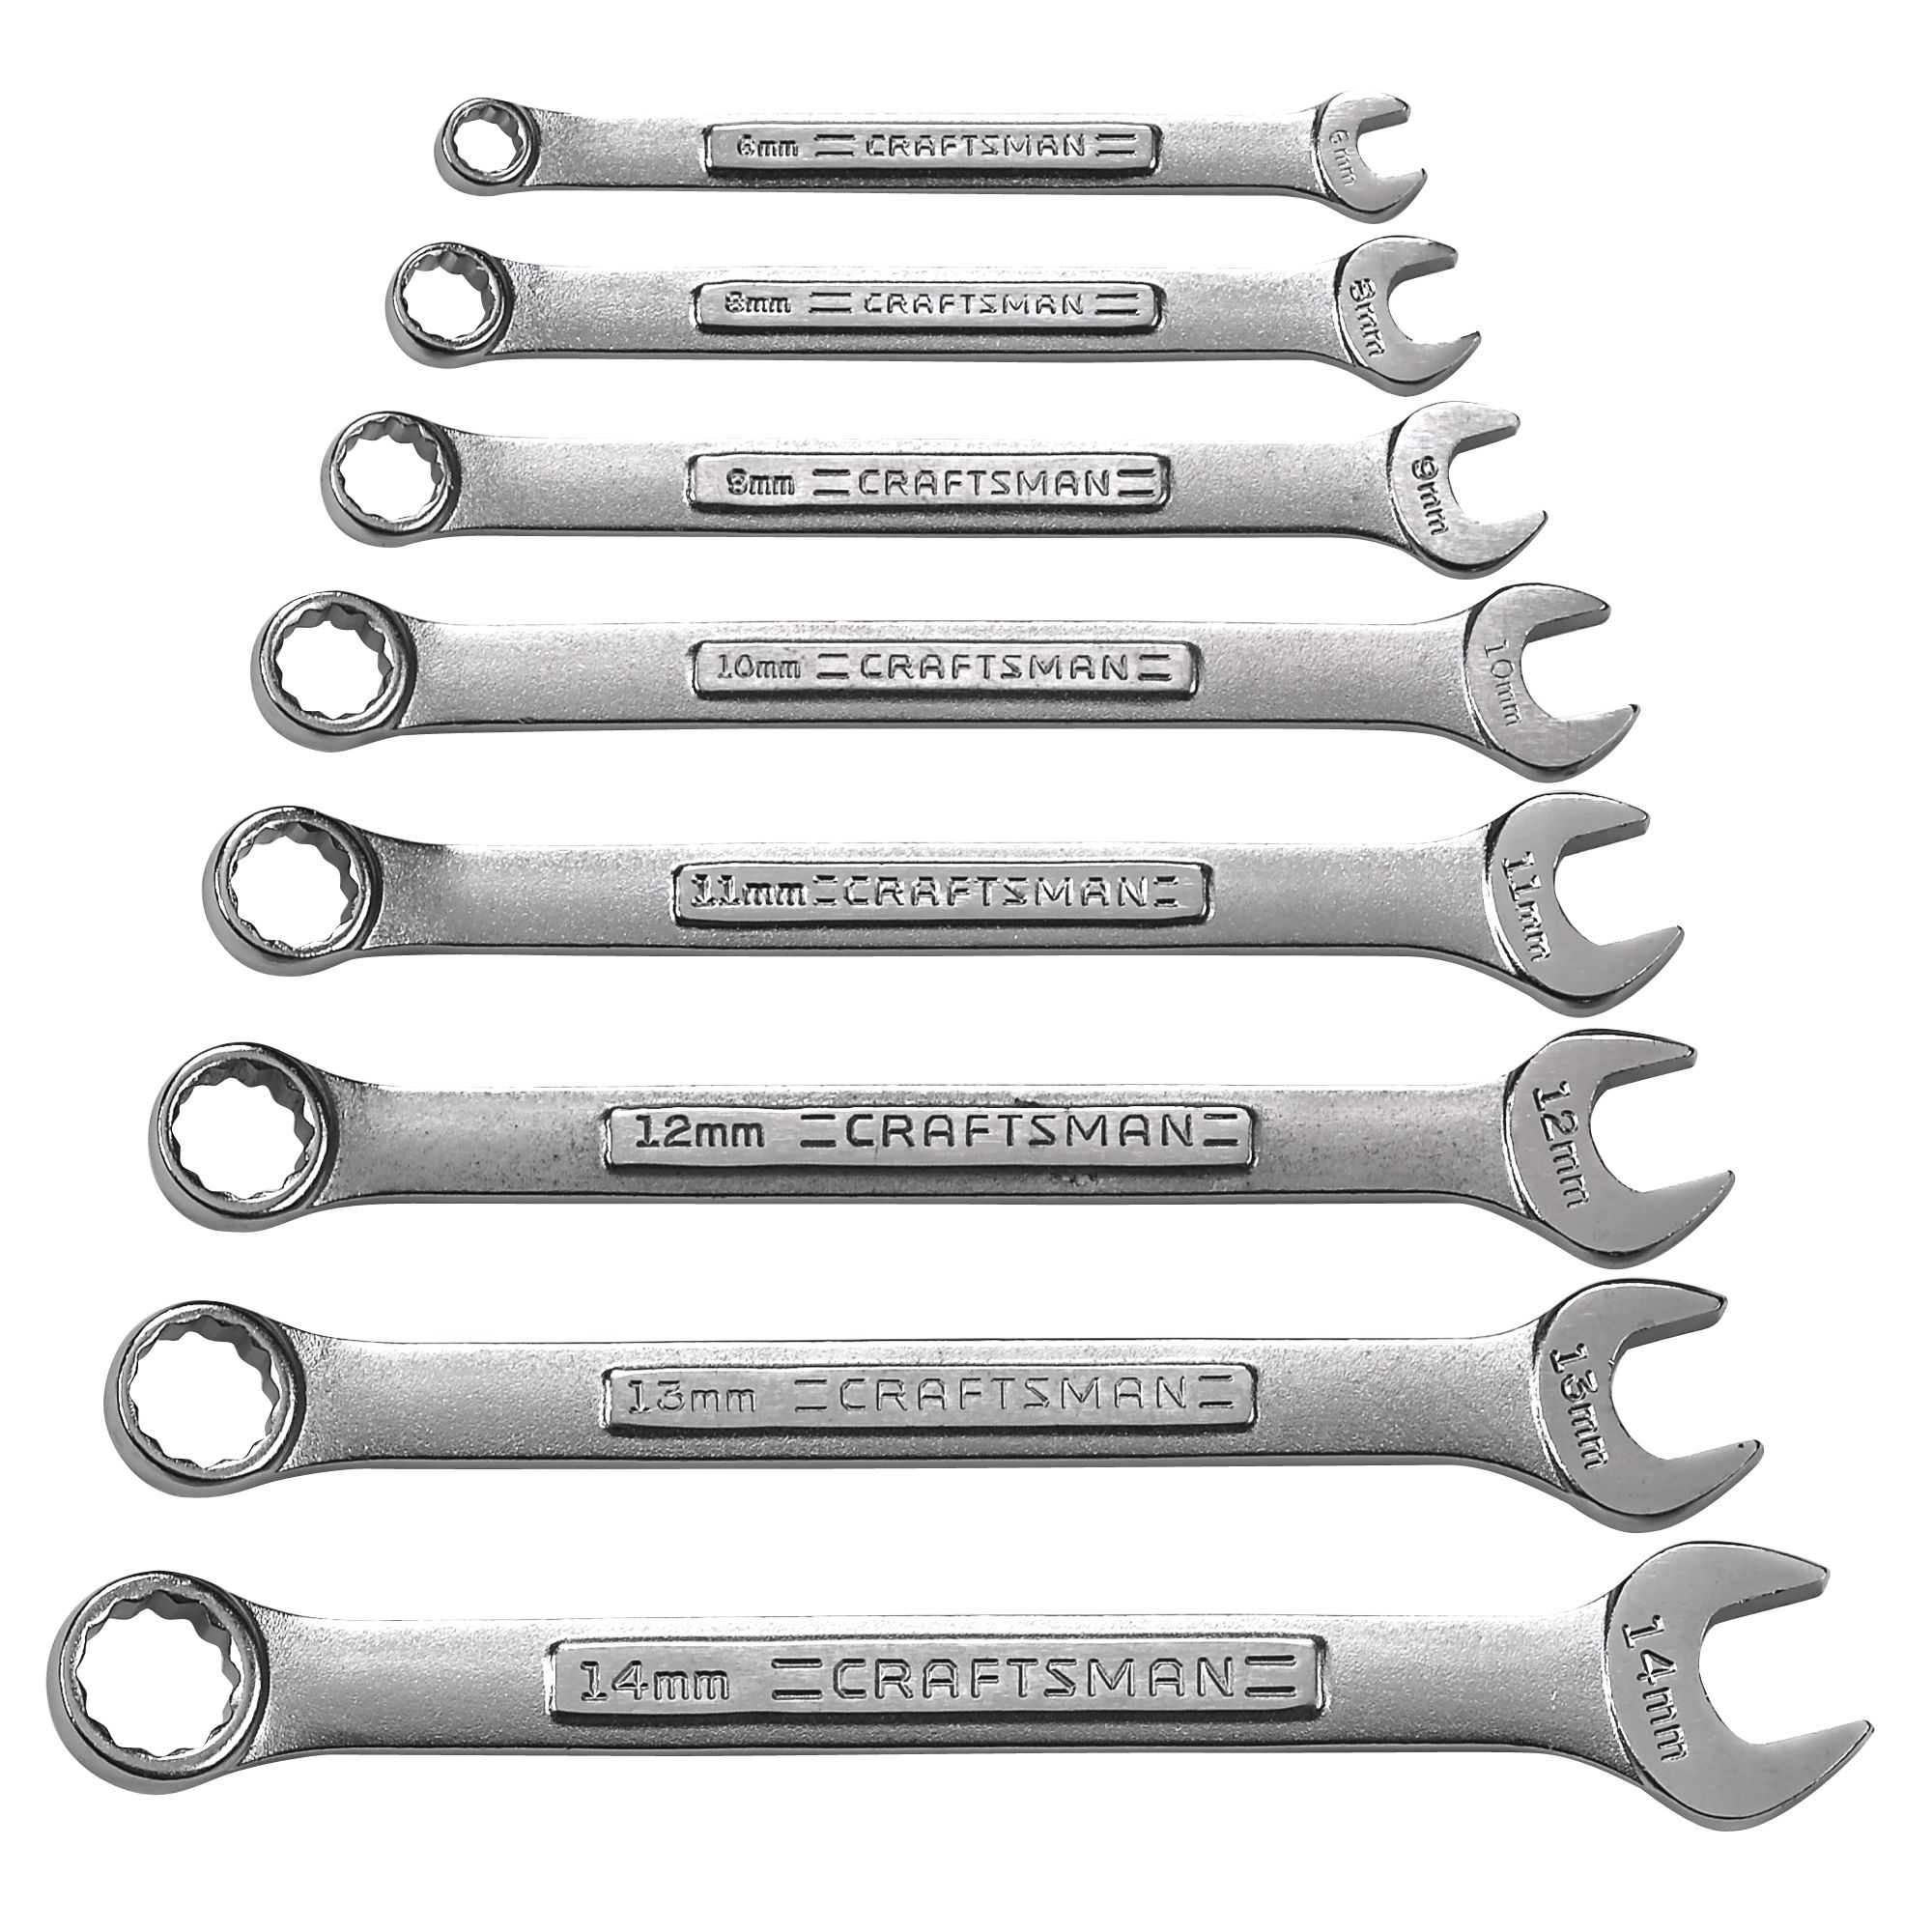 Craftsman Tool Sets, T-Shirts, and More Just $9.99!